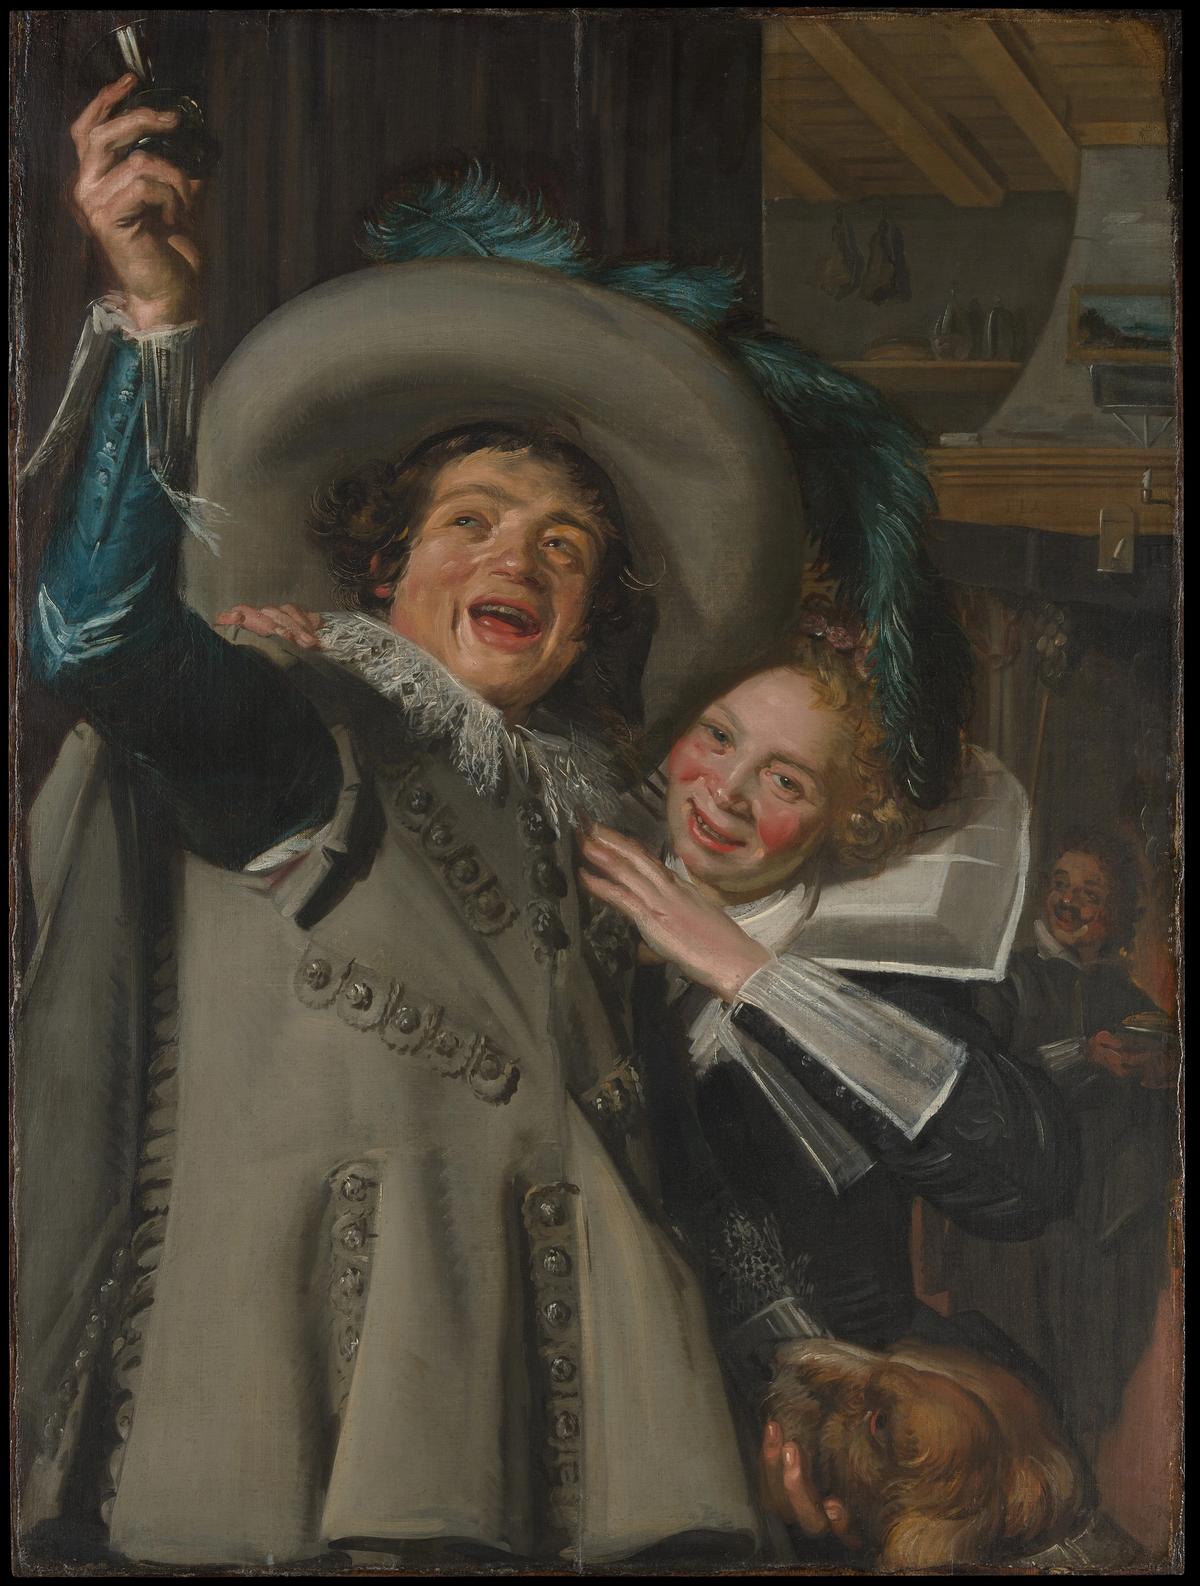 Frans Hals' Young Man and Woman in an Inn (1623) Courtesy of the Metropolitan Museum of Art, New York